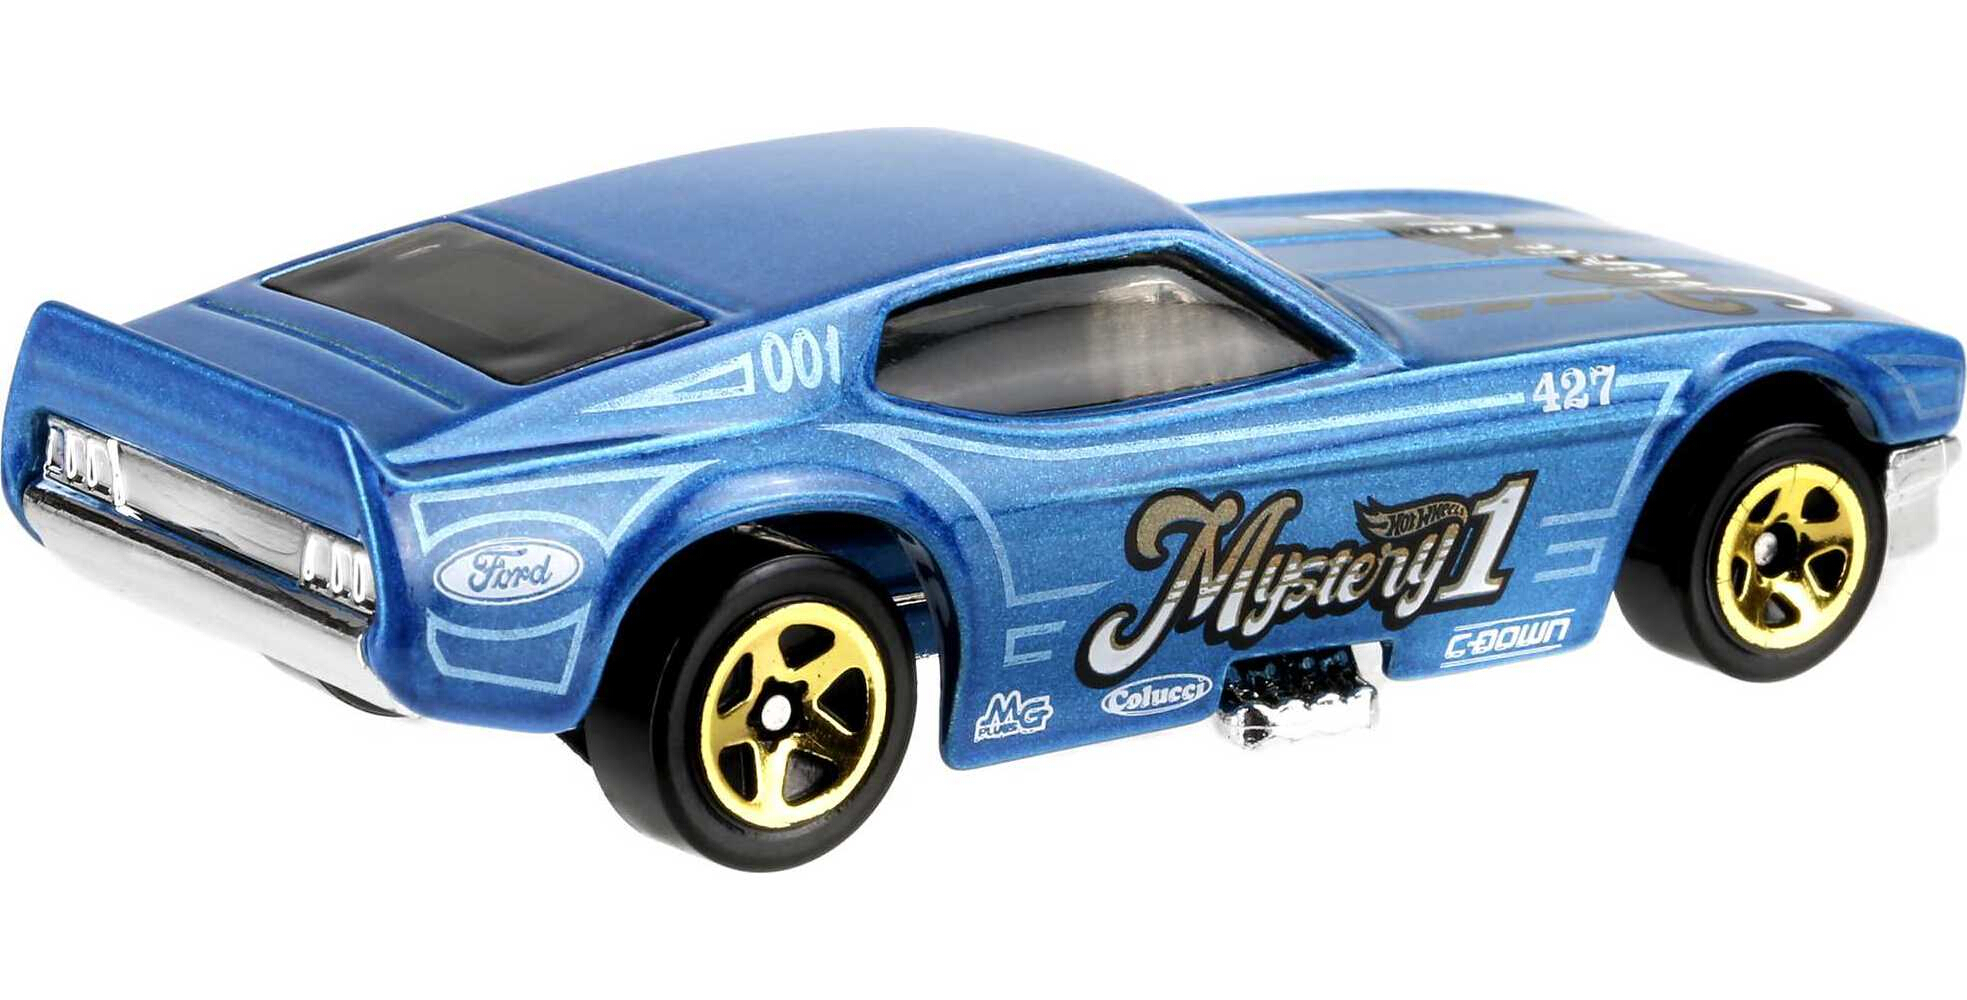 Hot Wheels Mystery Models Surprise Toy Car or Truck in 1:64 Scale (Styles May Vary) - image 3 of 6